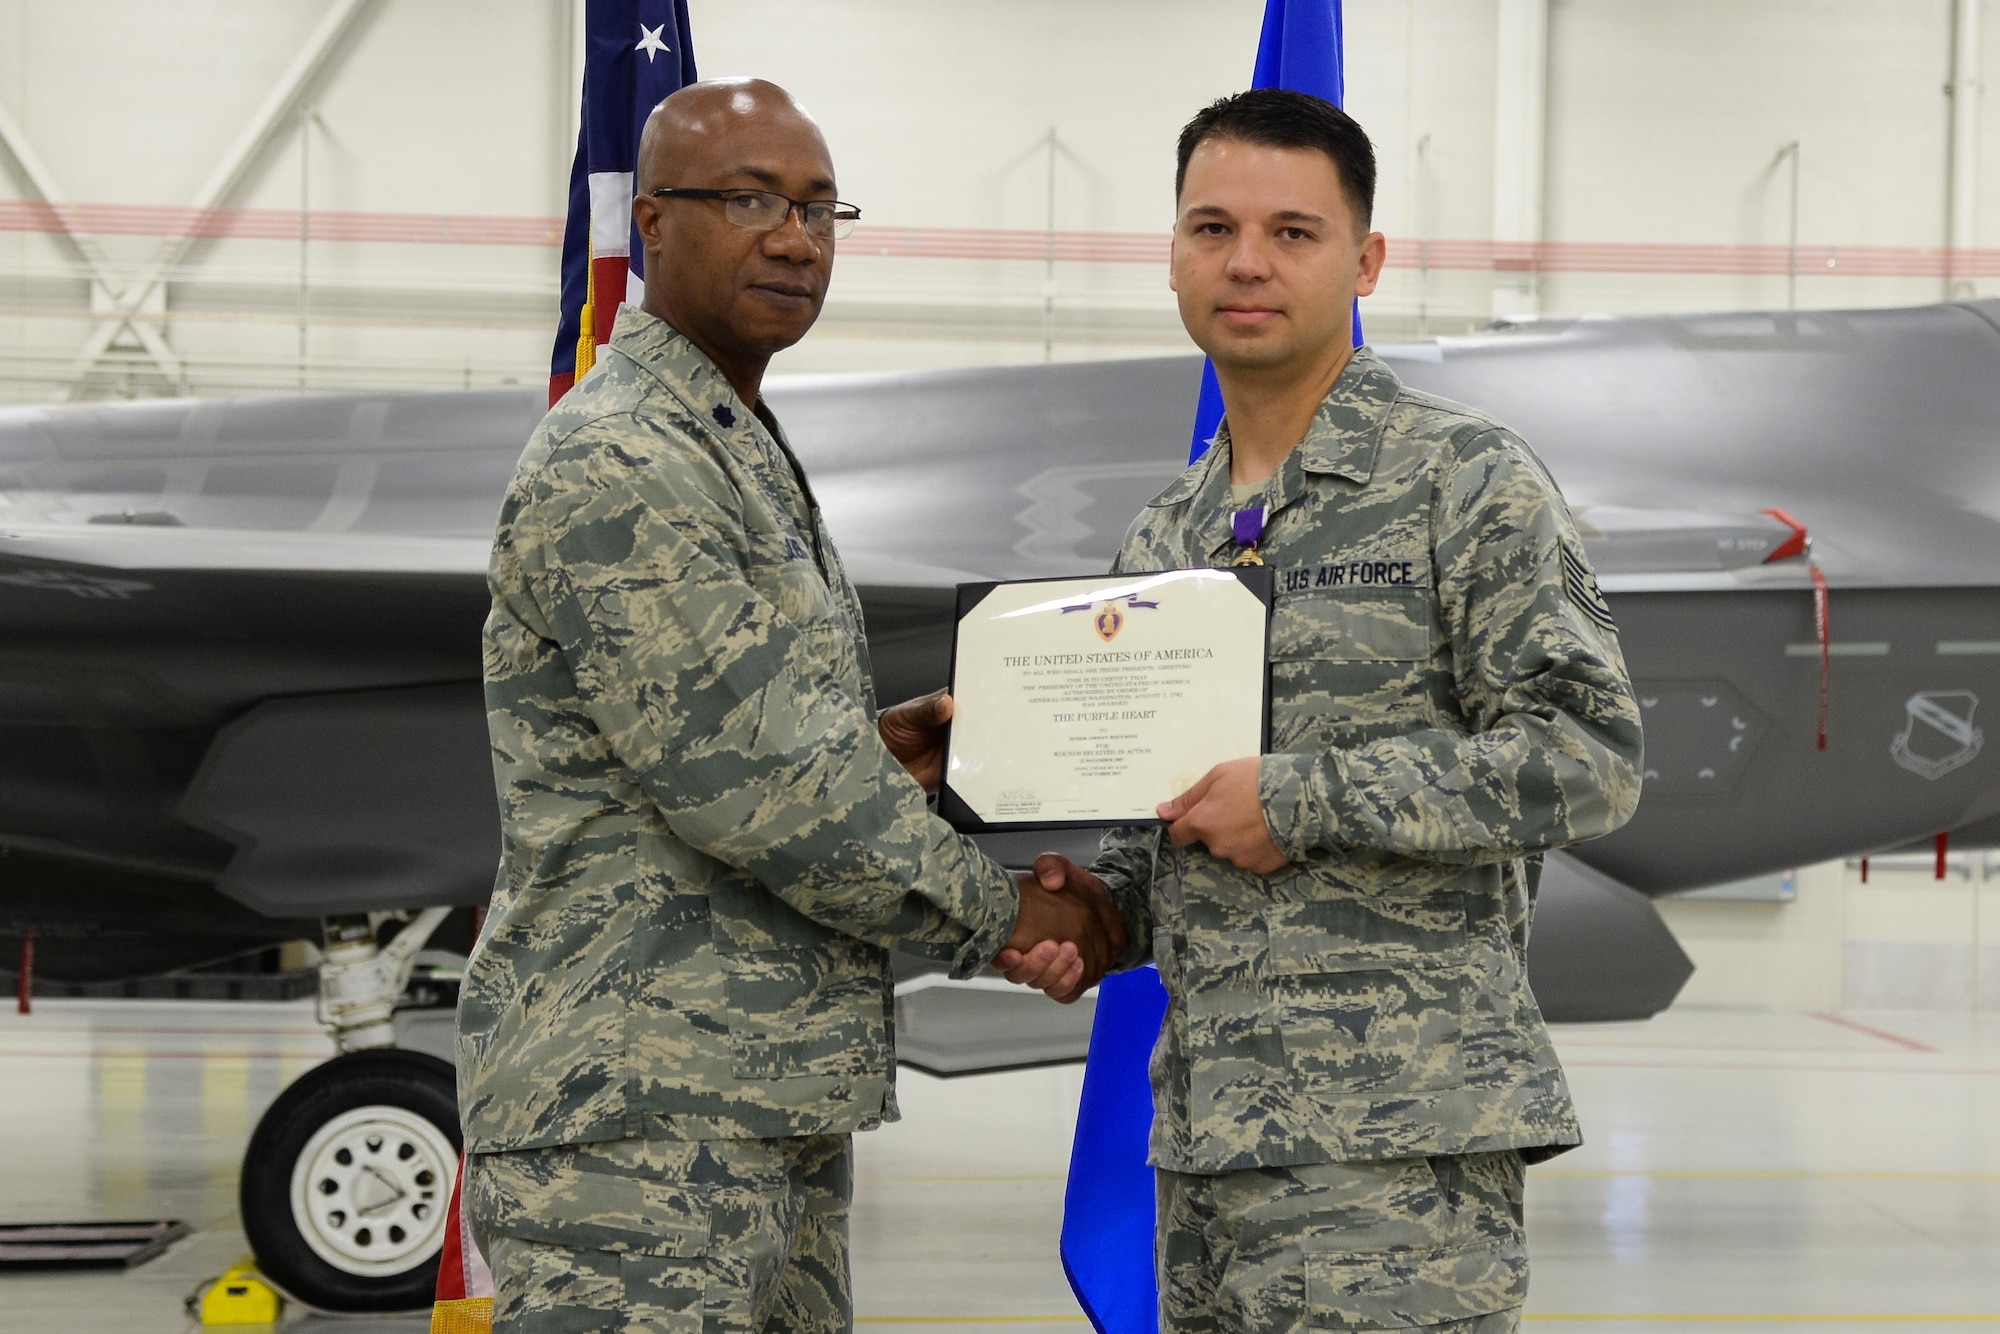 Electronic Warfare Specialist Staff Sgt. Jesus Soto receives a Purple Heart from 388th Component Maintenance Sqaudron Commander Lt. Col. Steven Oliver at Hill Air Force Base, Utah, Oct. 30, 2015. Soto was injured in 2005 while deployed with the 1st Security Forces Squadron to Forward Operating Base Speicher near Tikrit, Iraq. While there, he provided security to U.S. convoys and foreign national supply trucks. (U.S. Air Force photo by R. Nial Bradshaw/Released)